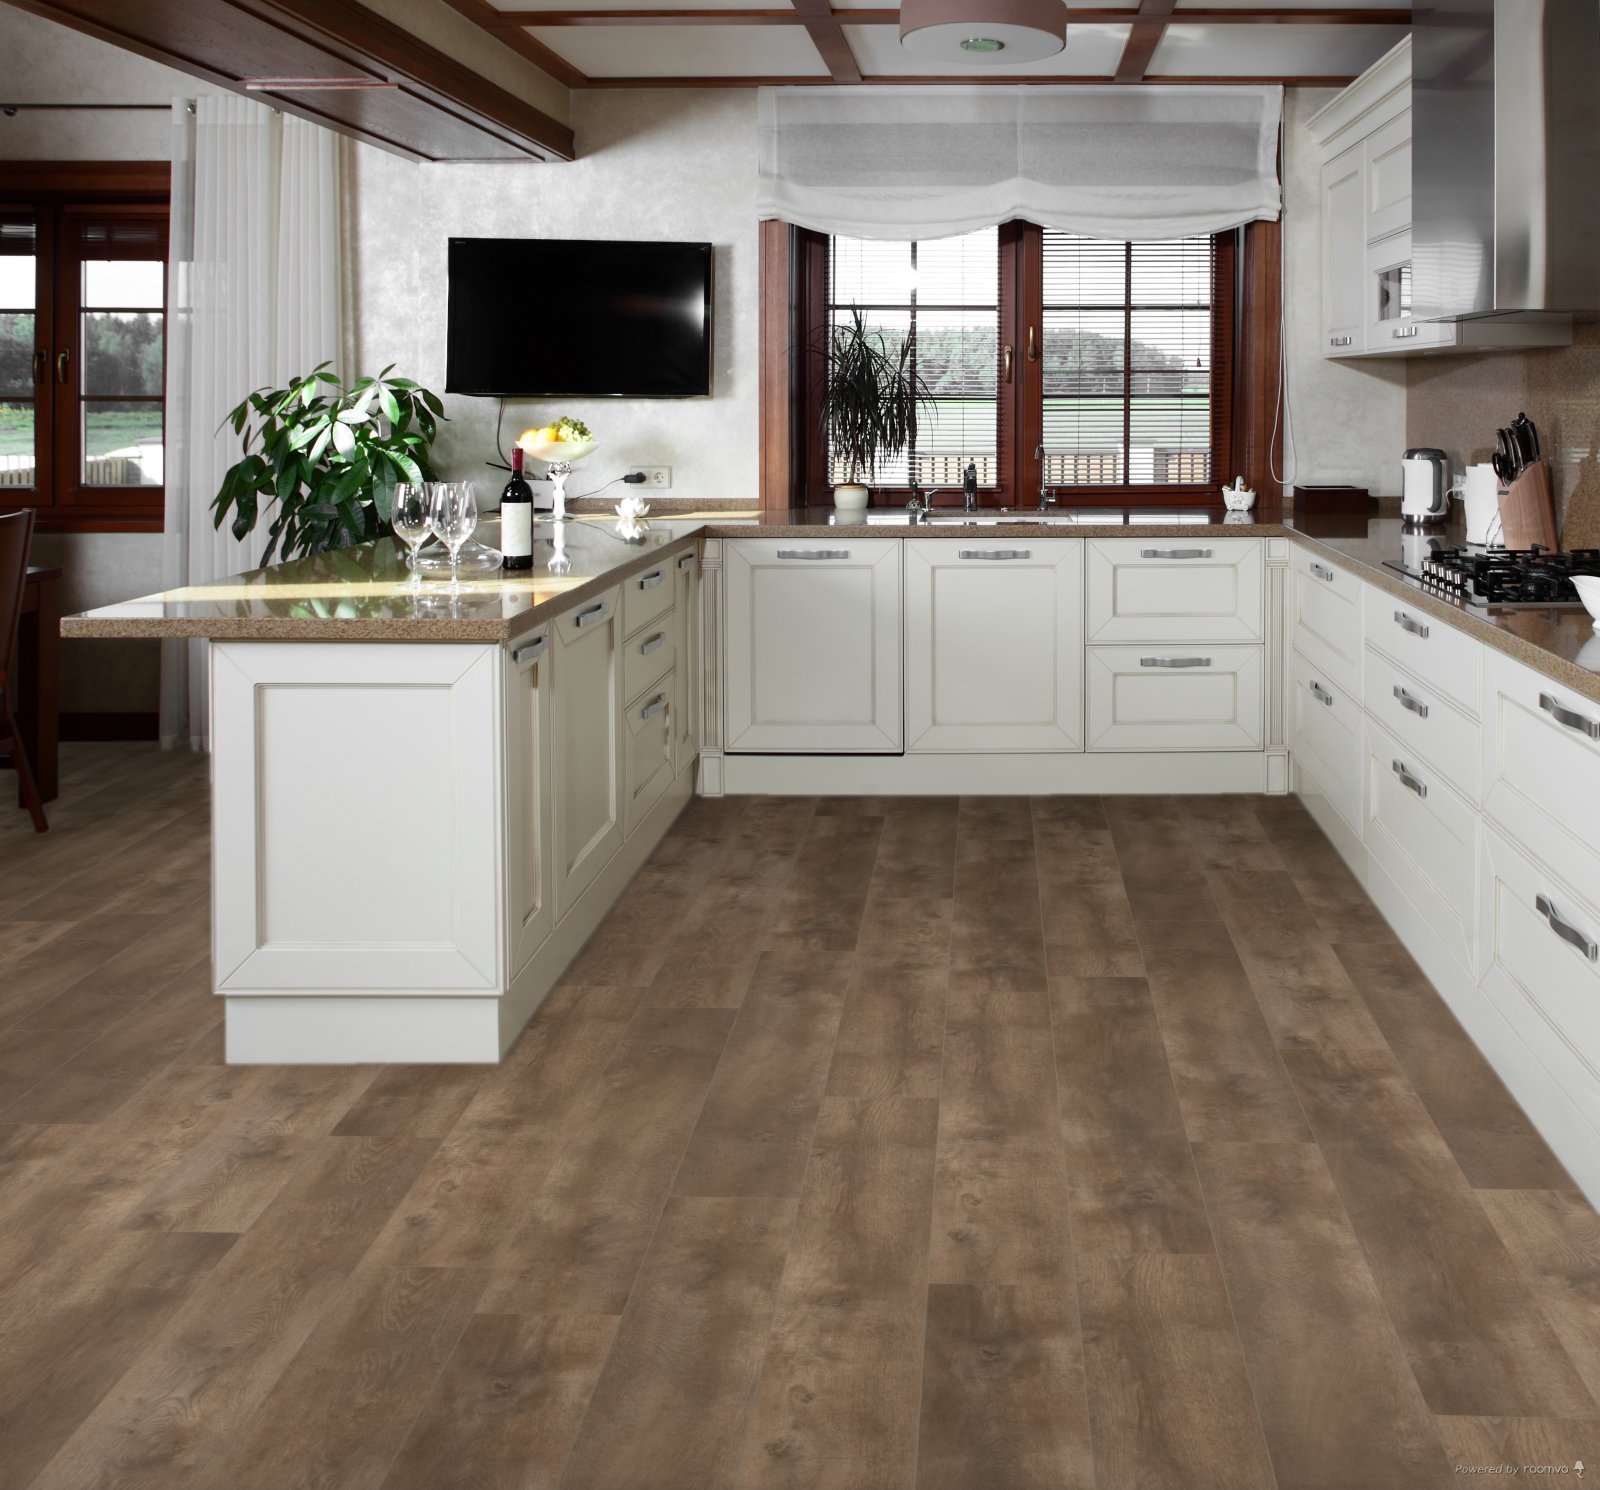 Horizen Flooring presents to you a picture of a quality wide plank Chopin luxury vinyl plank. NovoCore Q XXL Tango collection features a wide range of colors & designs that will compliment any interior. Natural wood grain synchronized surface allow for an authentic hardwood look & feel. This collection features a 0.3″ / 7.5 mm overall thickness and a durable 22 mil / 0.55 mm wear layer for residential and commercial applications.